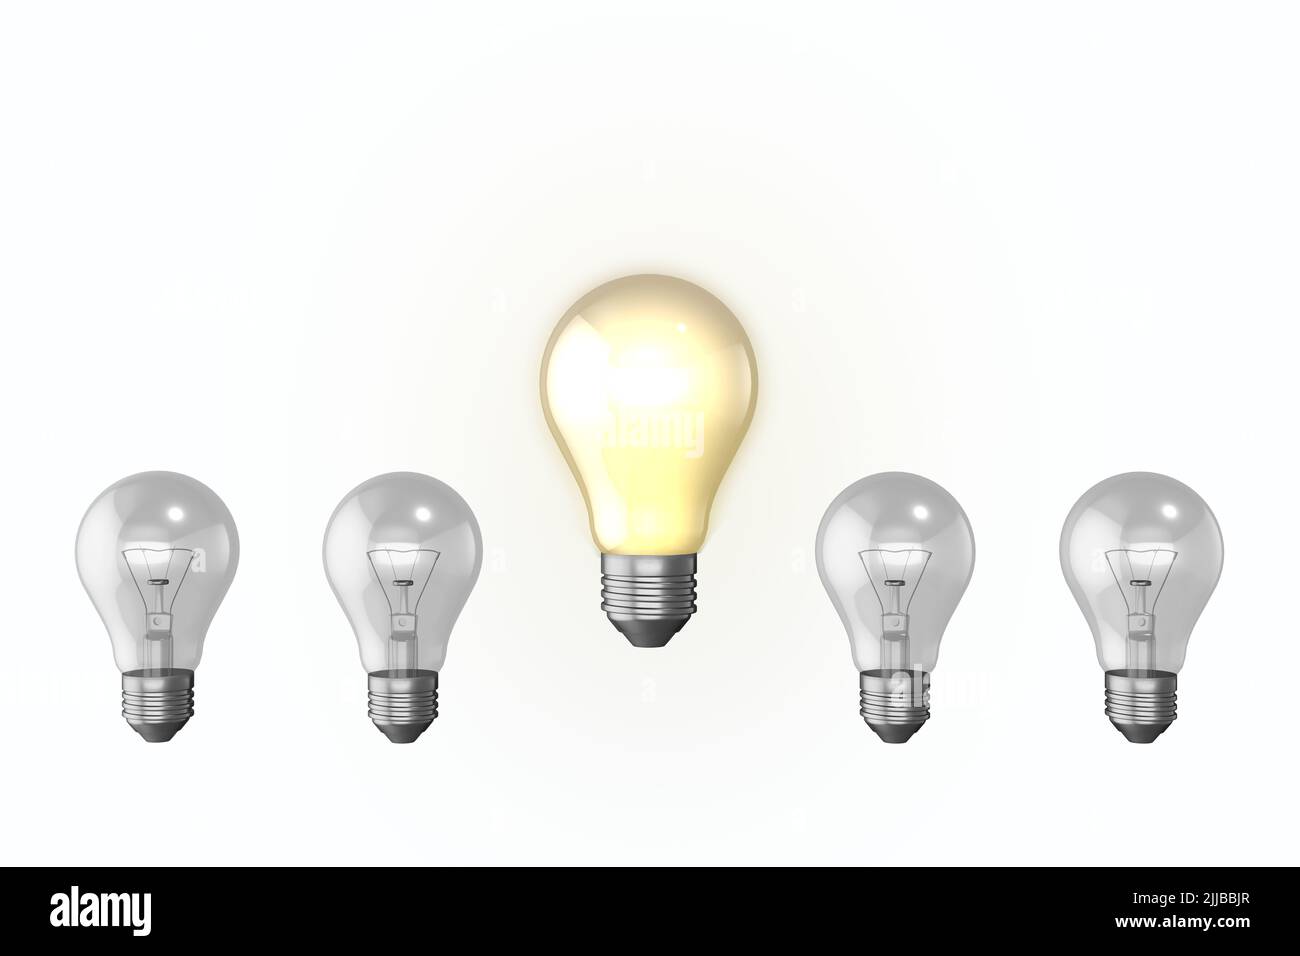 lightbulb light bulb moment idea imagination concept inspiration concept lit glowing old style light bulbs lightbulbs isolated cut out Stock Photo